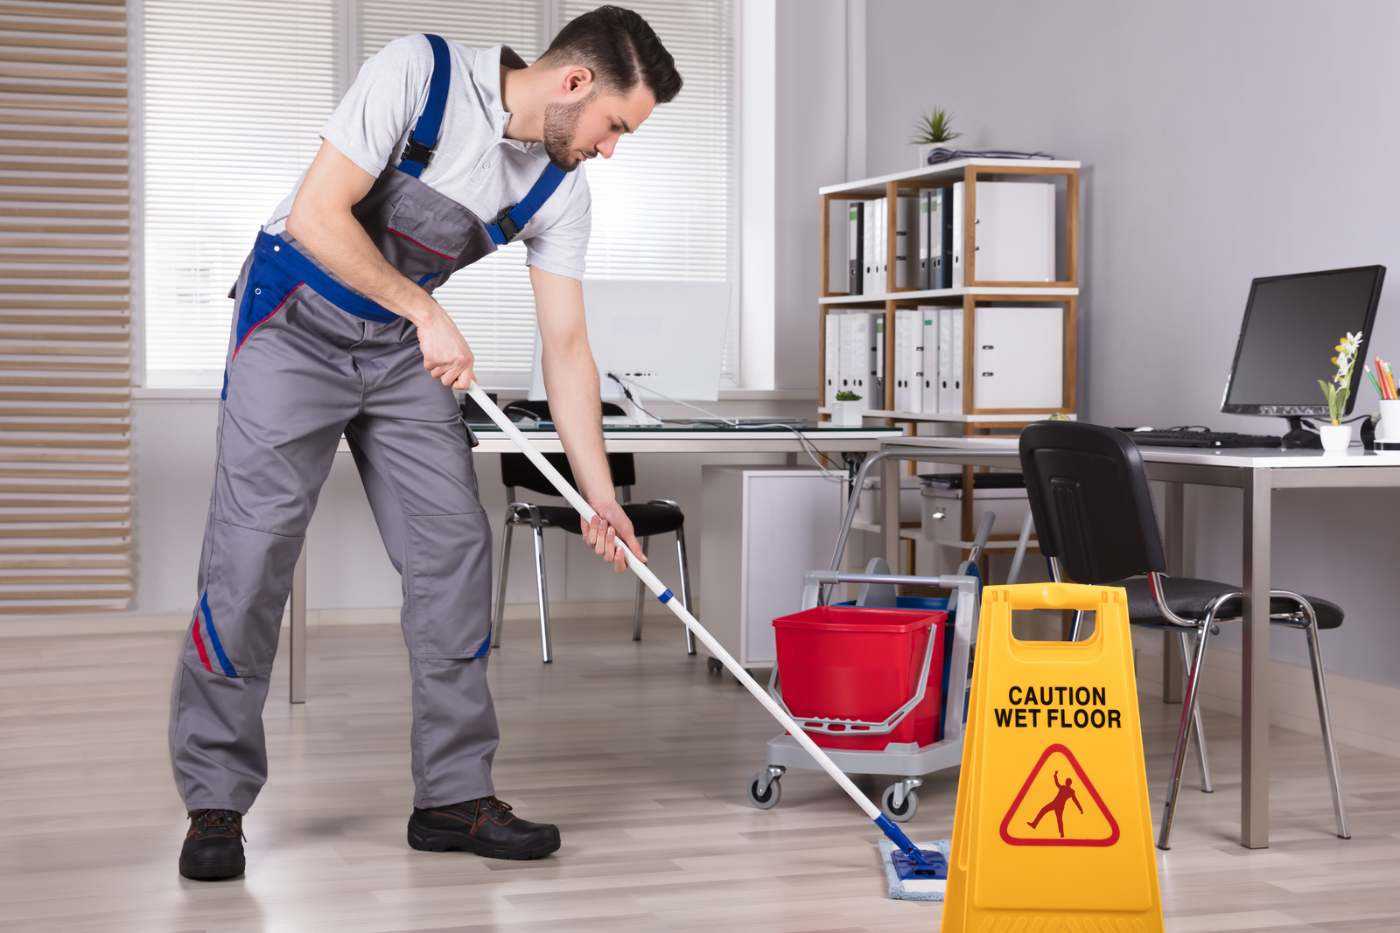 Professional Cleaner Mopping Floor